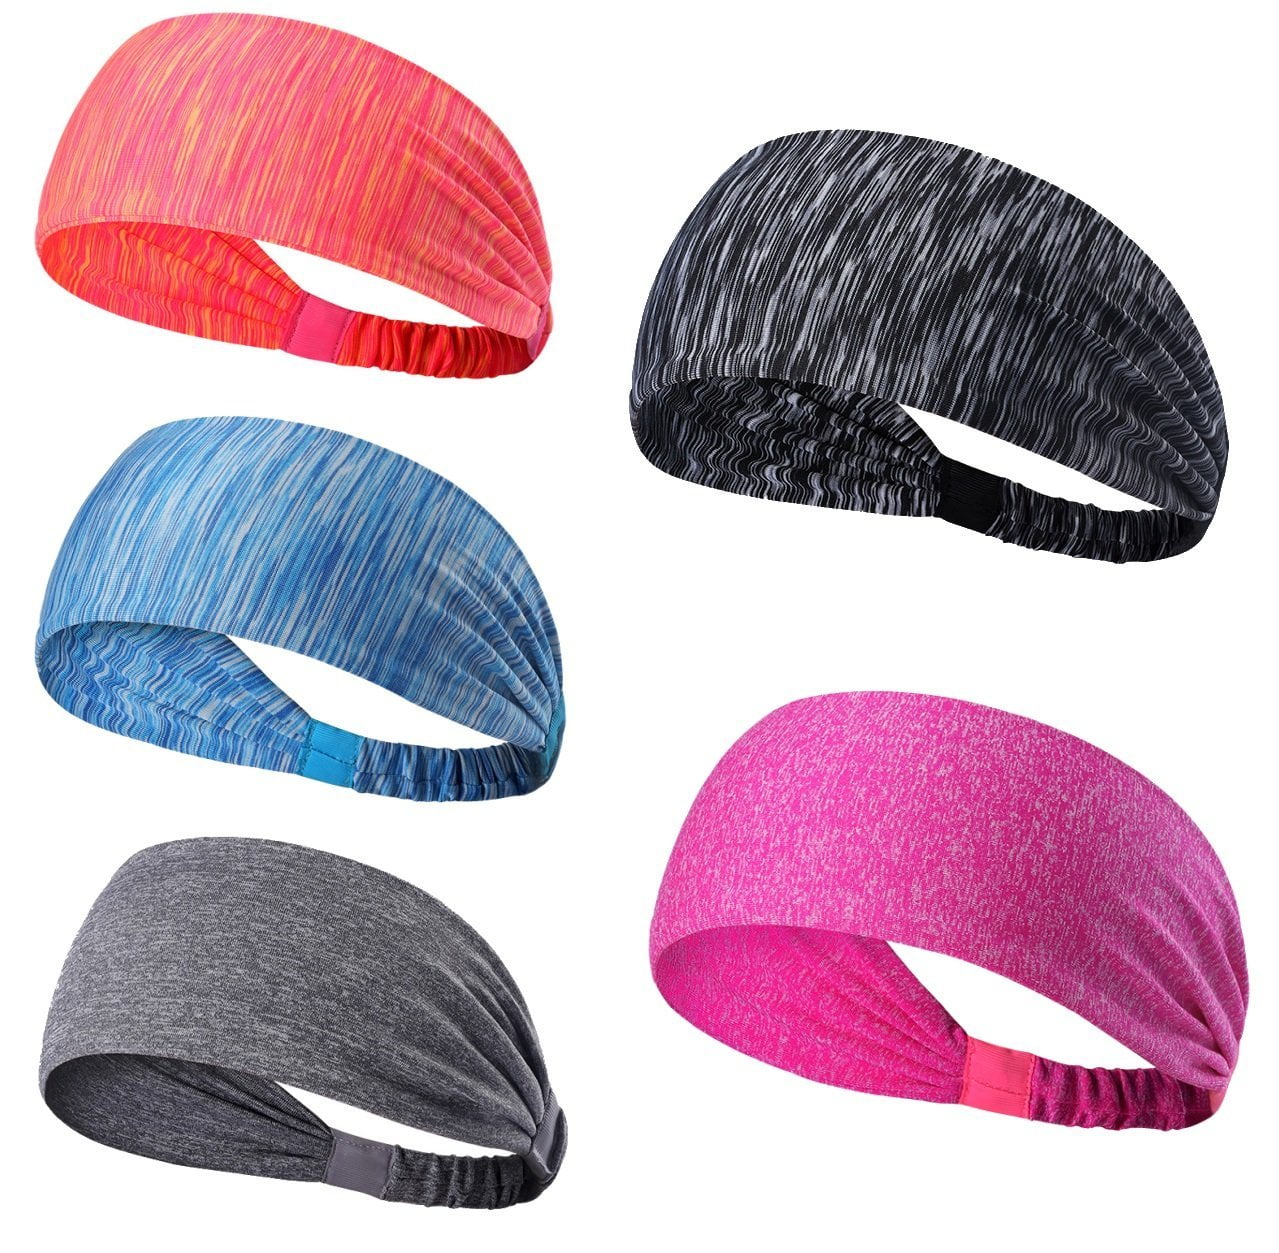 Yoga Cycling 3 Pack Elastic Hair Band Non Slip Moisture Wicking Wide Headband Athletic Sweatband for Men and Women Basketball TAGVO Sports Headband Fit for Runing